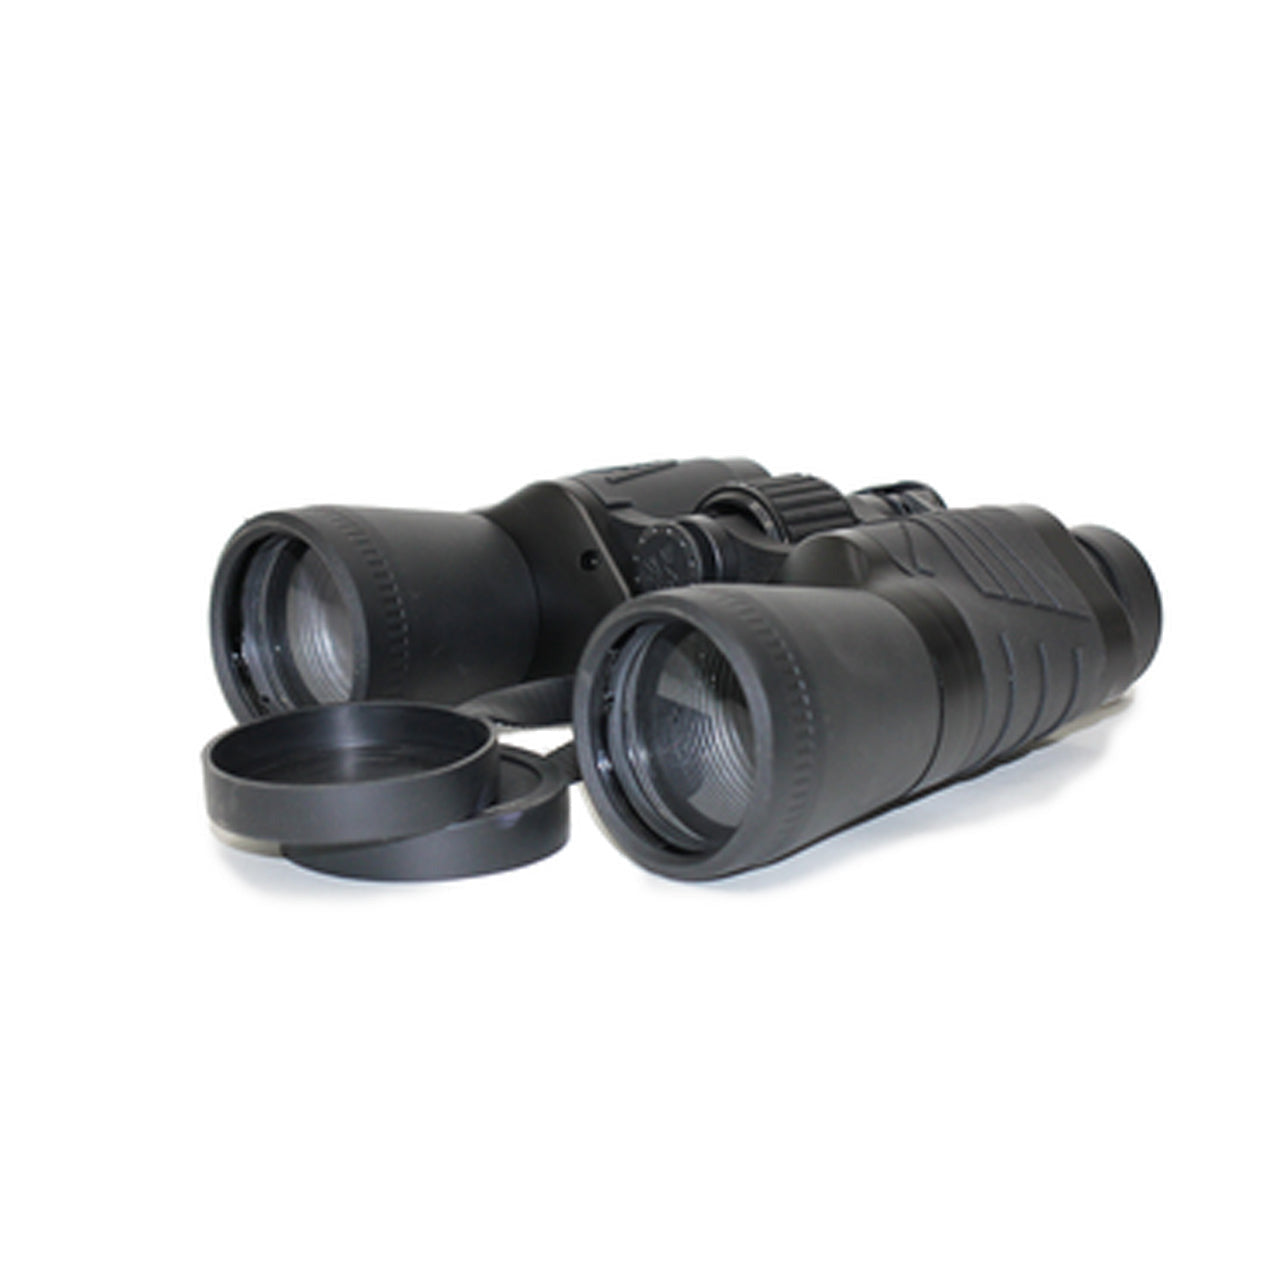 These 7x50 binoculars come in black and are built with a lightweight, ergonomic design. These binoculars are perfect for those looking for extremely versatile, high quality, and economically priced optics. www.defenceqstore.com.au